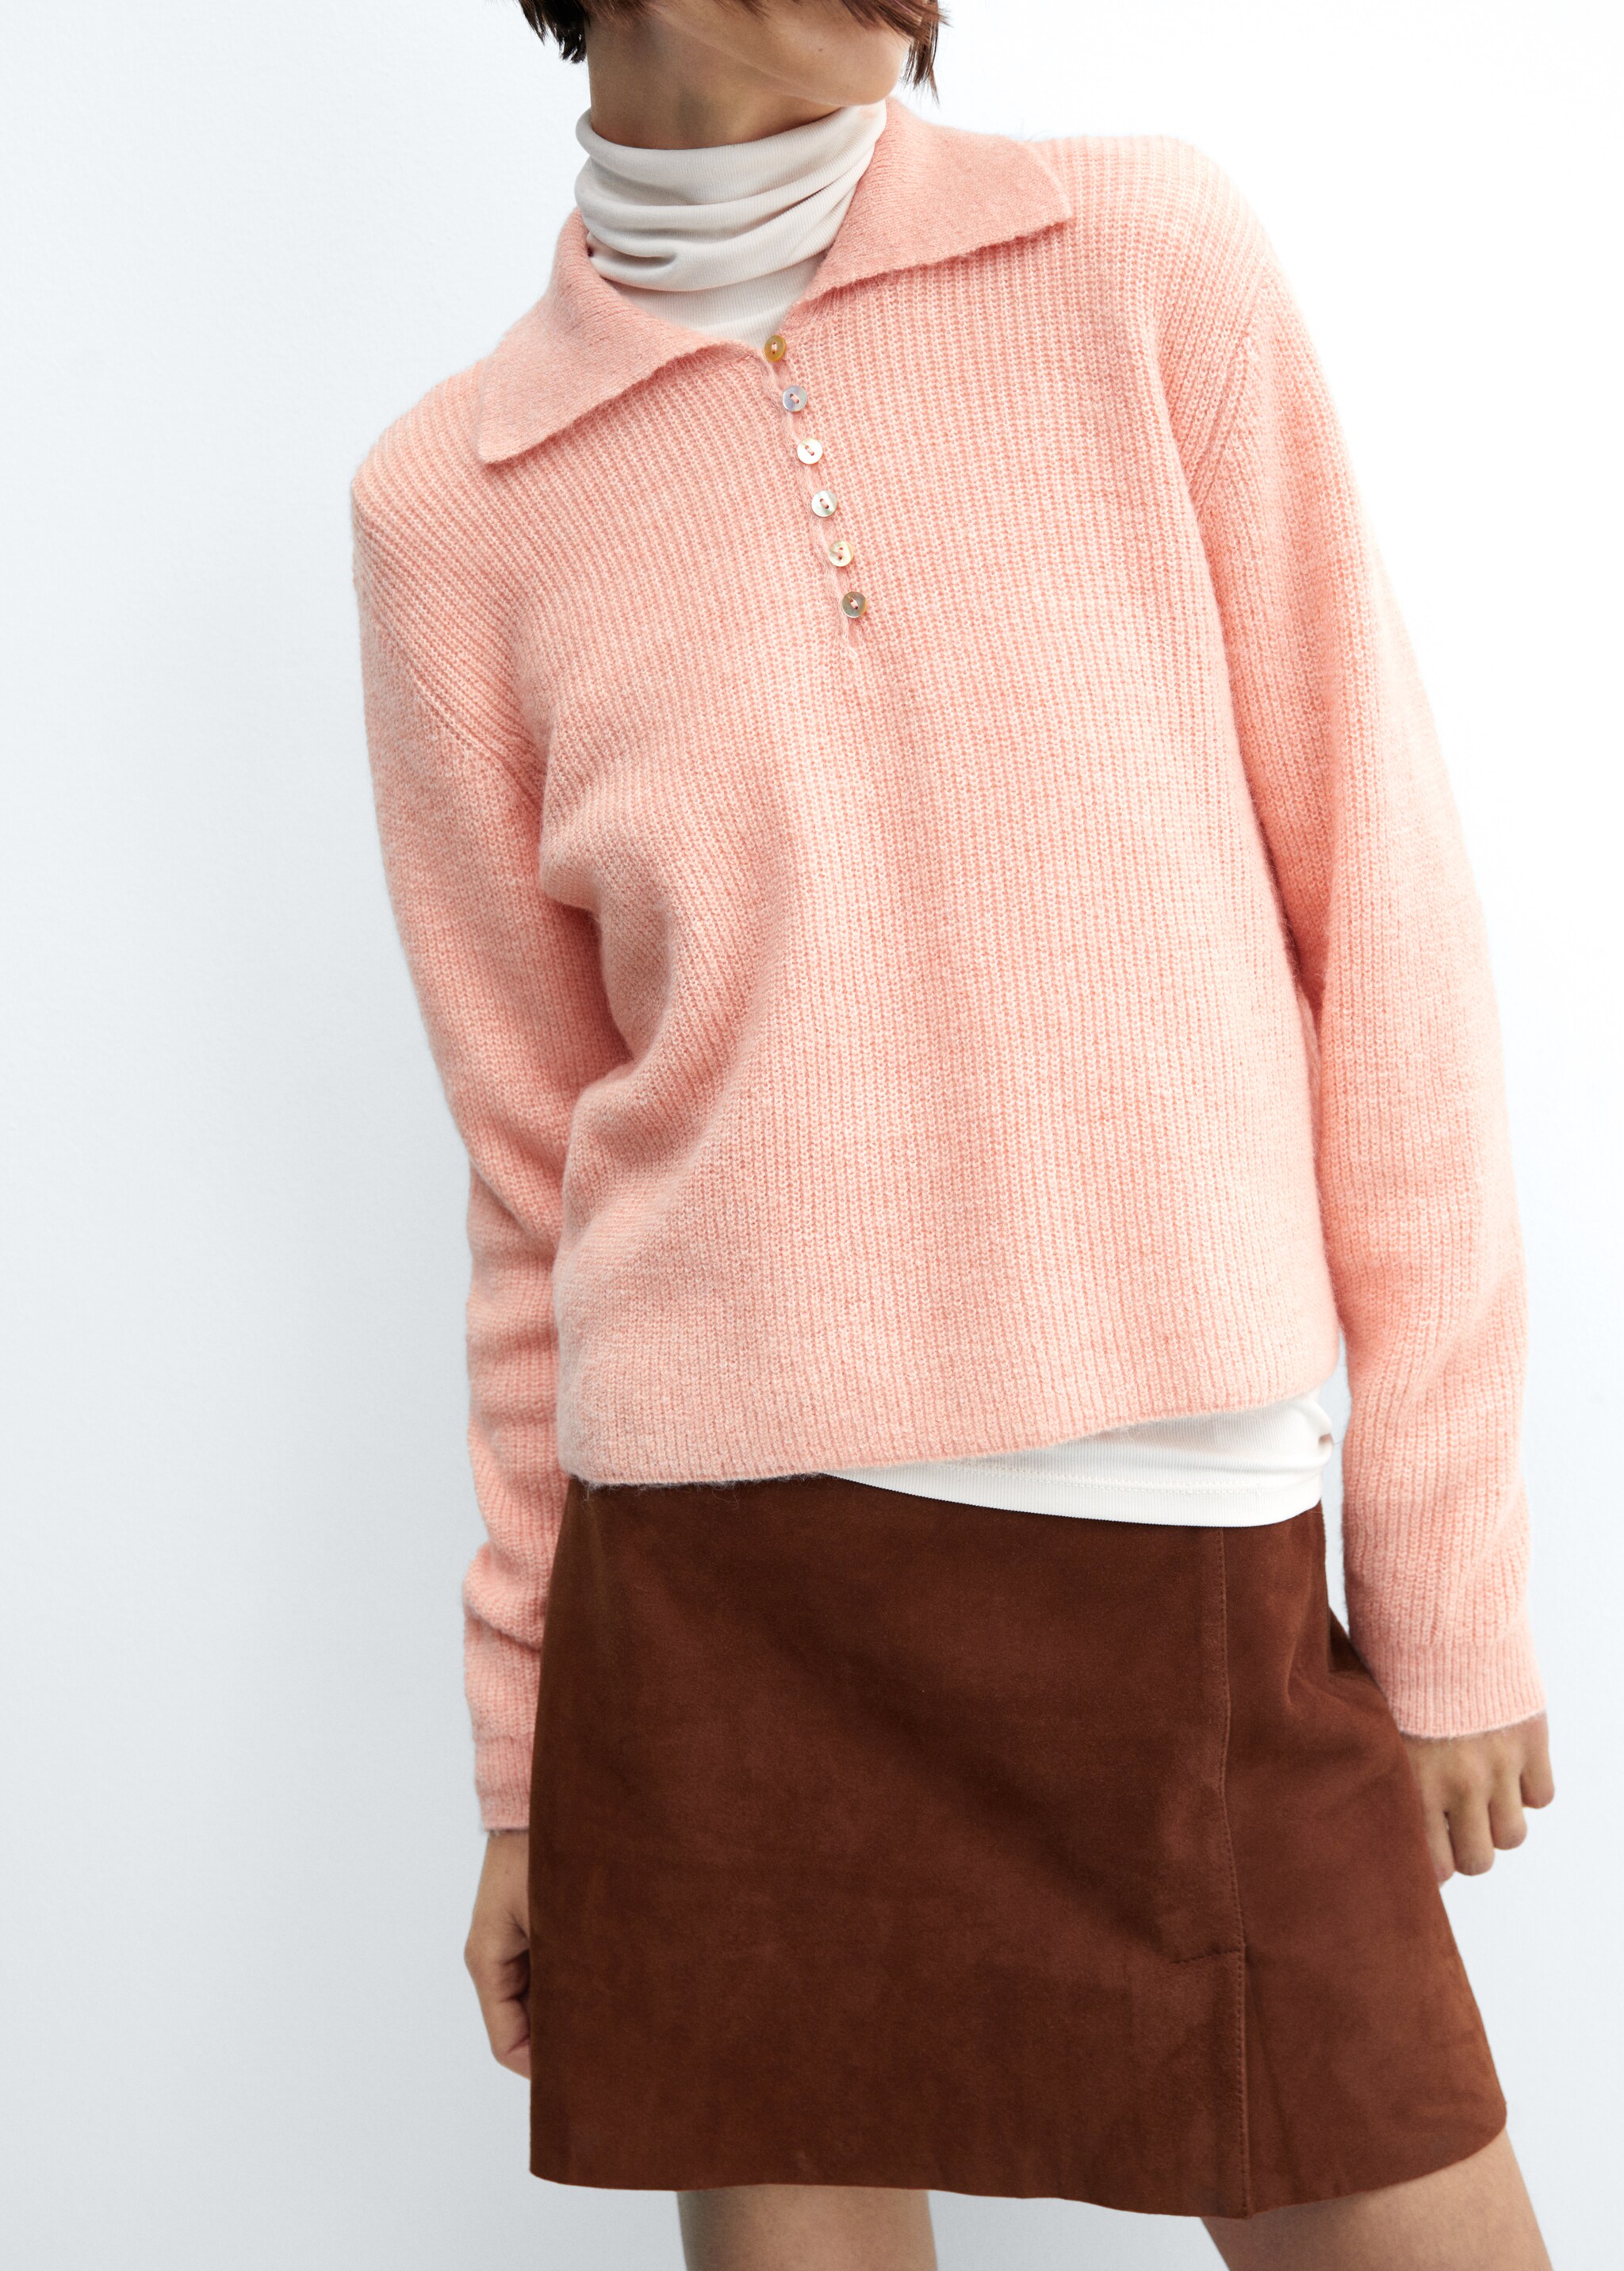 Knitted polo neck sweater - Details of the article 6